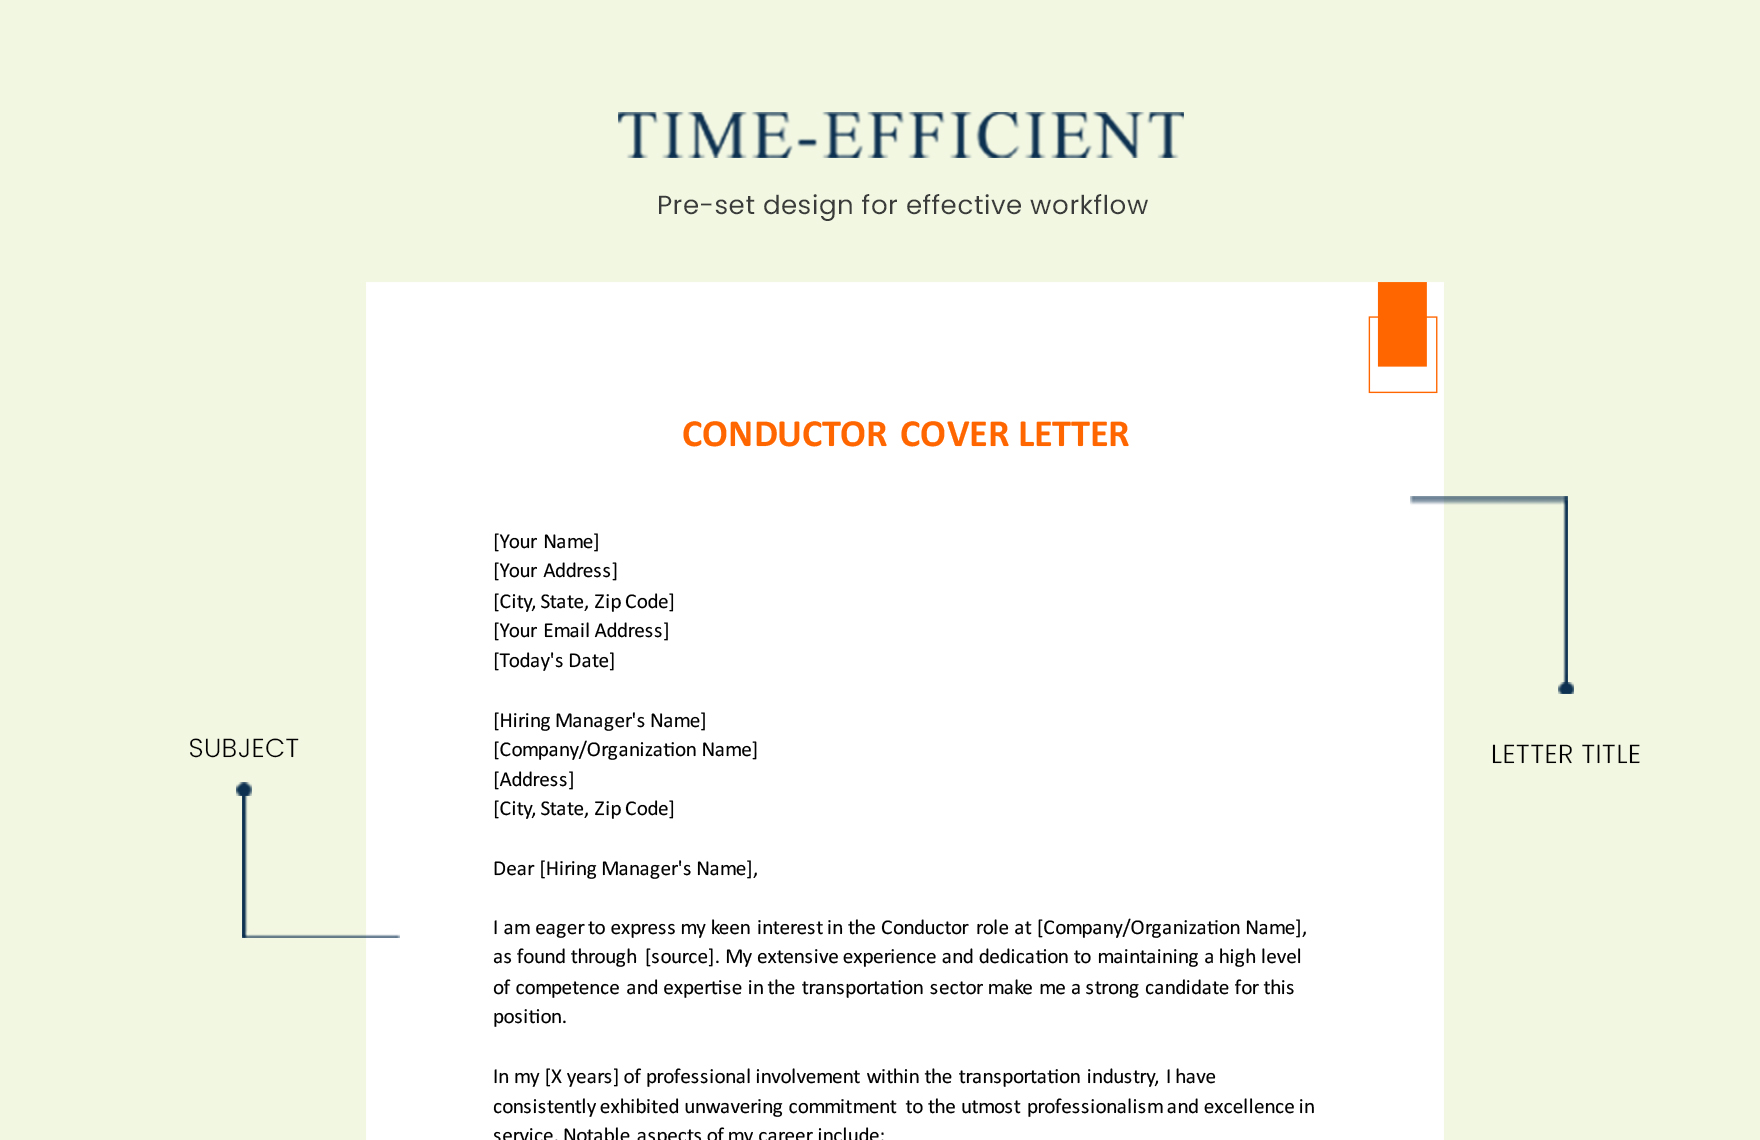 Conductor Cover Letter